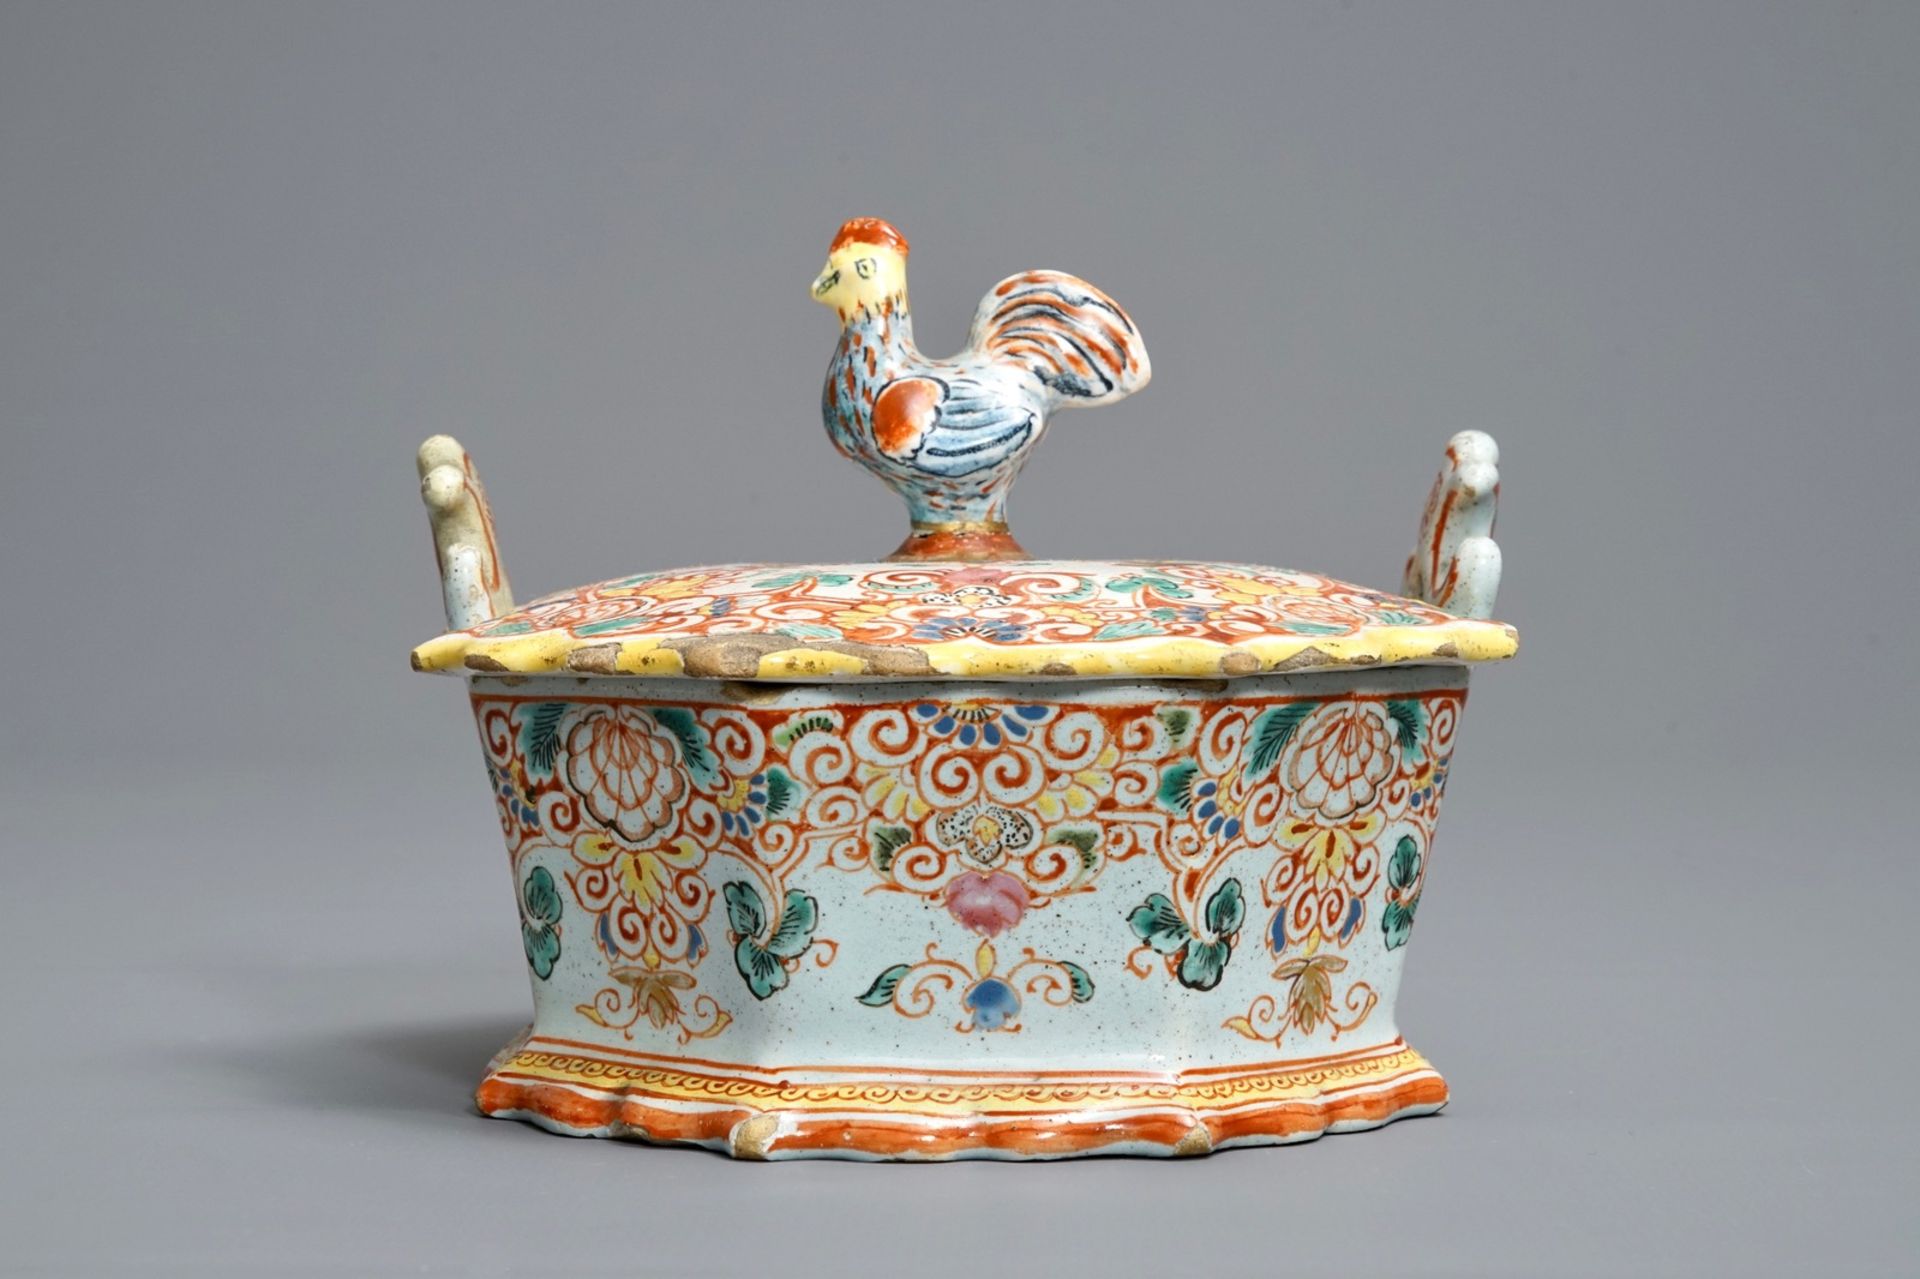 A polychrome petit feu and gilded Dutch Delft rooster-topped butter tub, 1st half 18th C. - Image 4 of 8